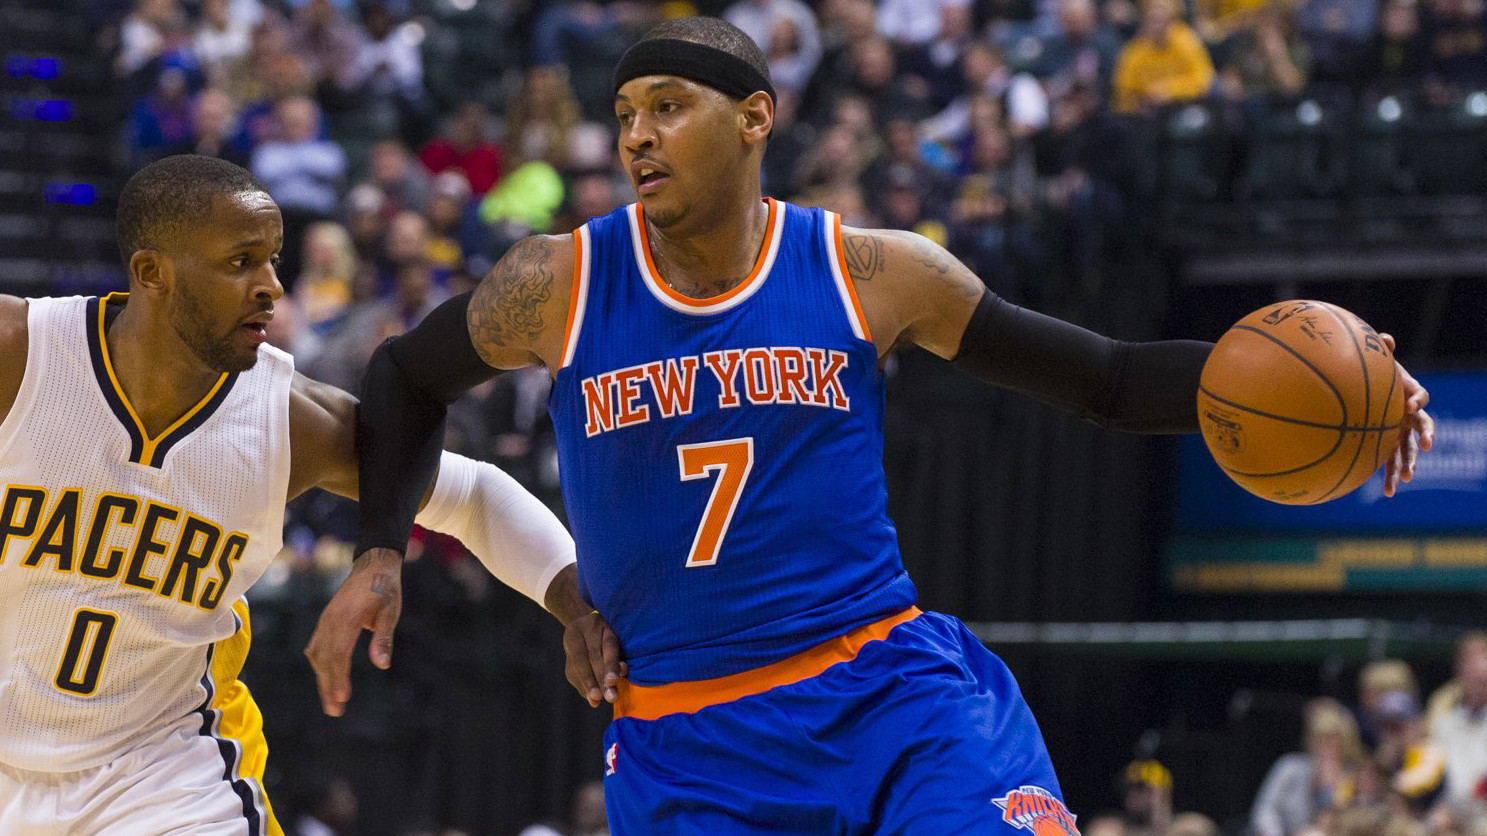 Lakers at New York Knicks preview - LA Times1487 x 836